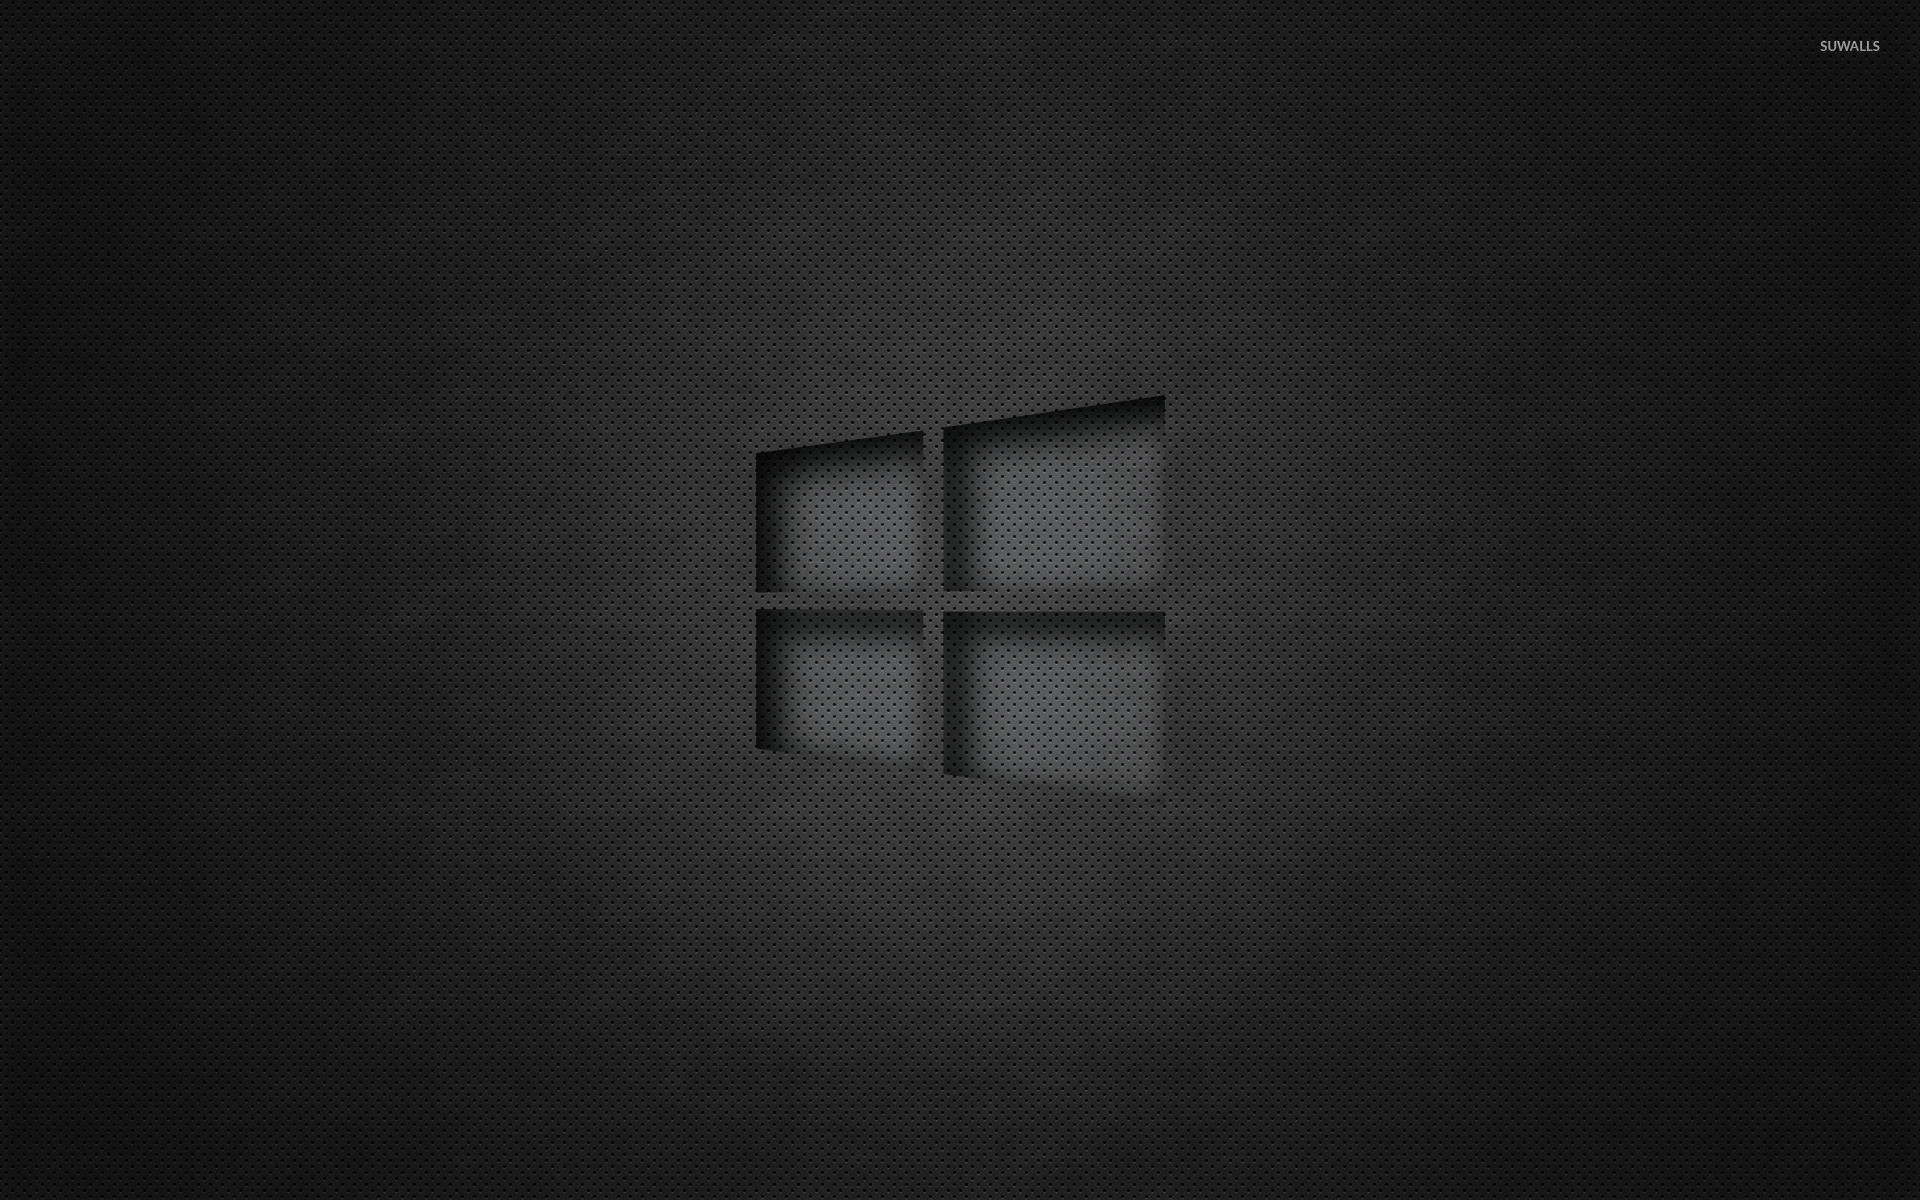 1920x1200 Windows 10 transparent logo on perforated leather wallpaper  jpg